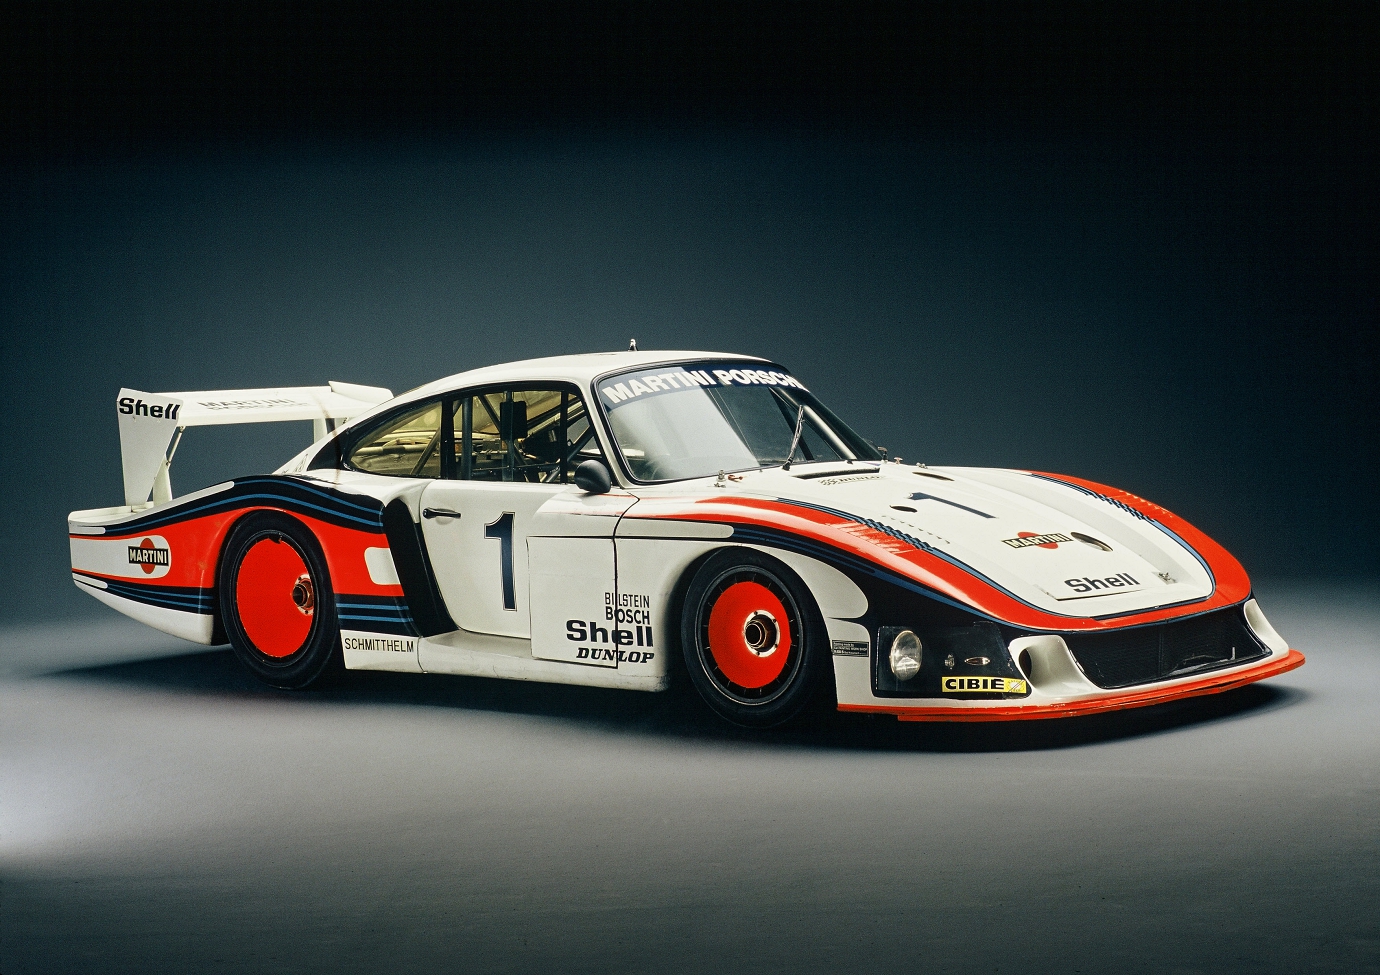 The original Moby Dick – the 935/78 Le Mans racecar